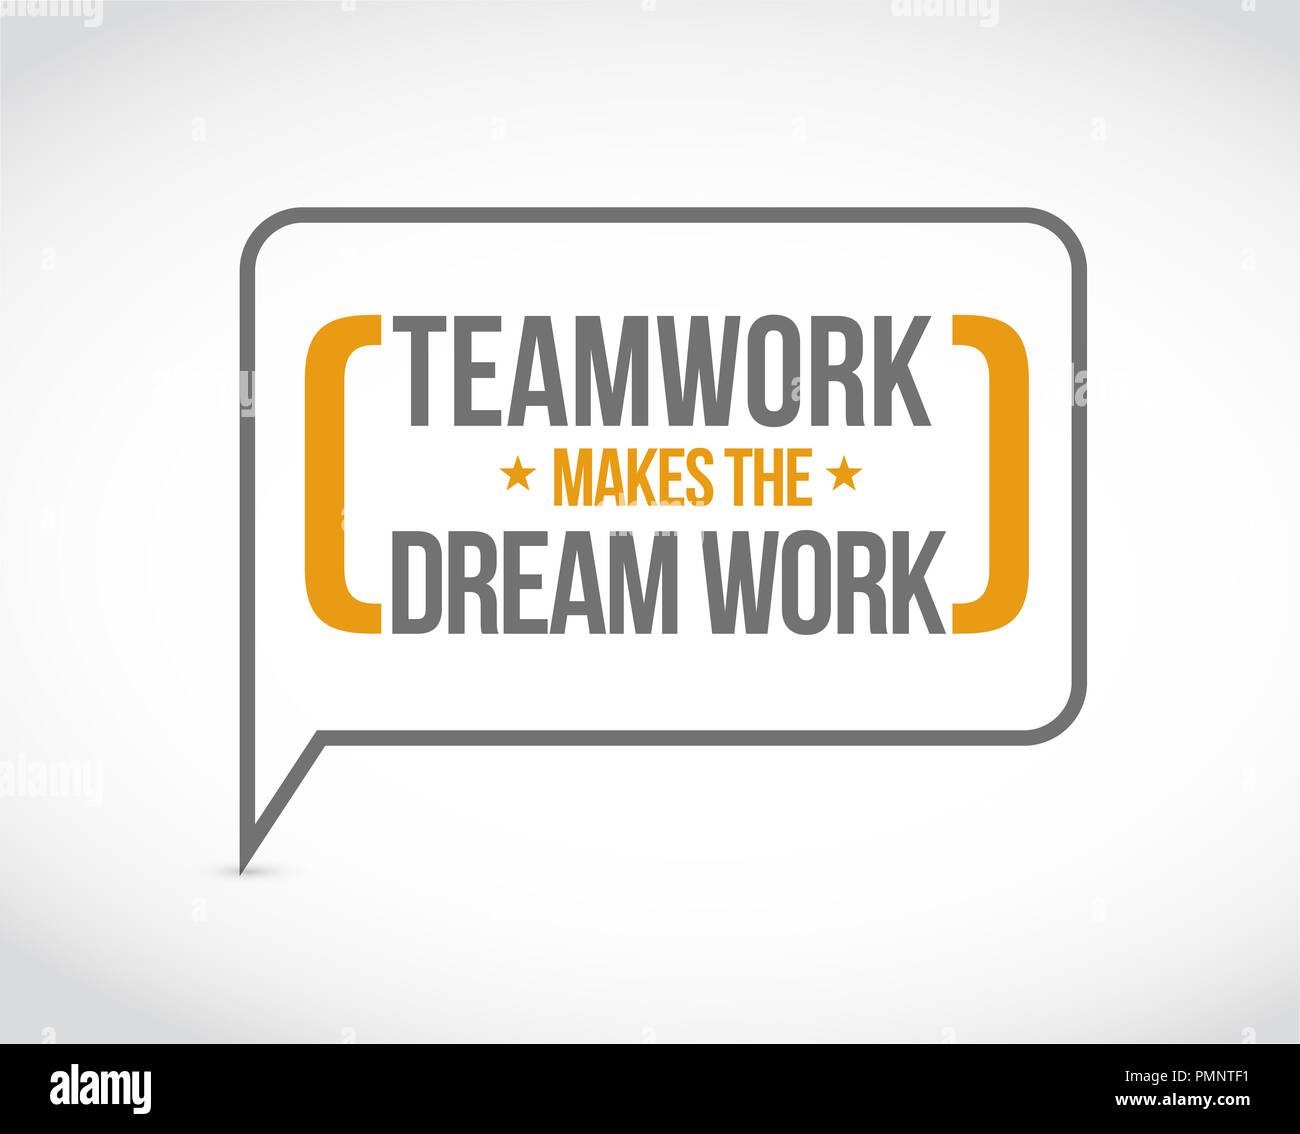 Teamwork makes the dream work message bubble isolated over a white background Stock Photo